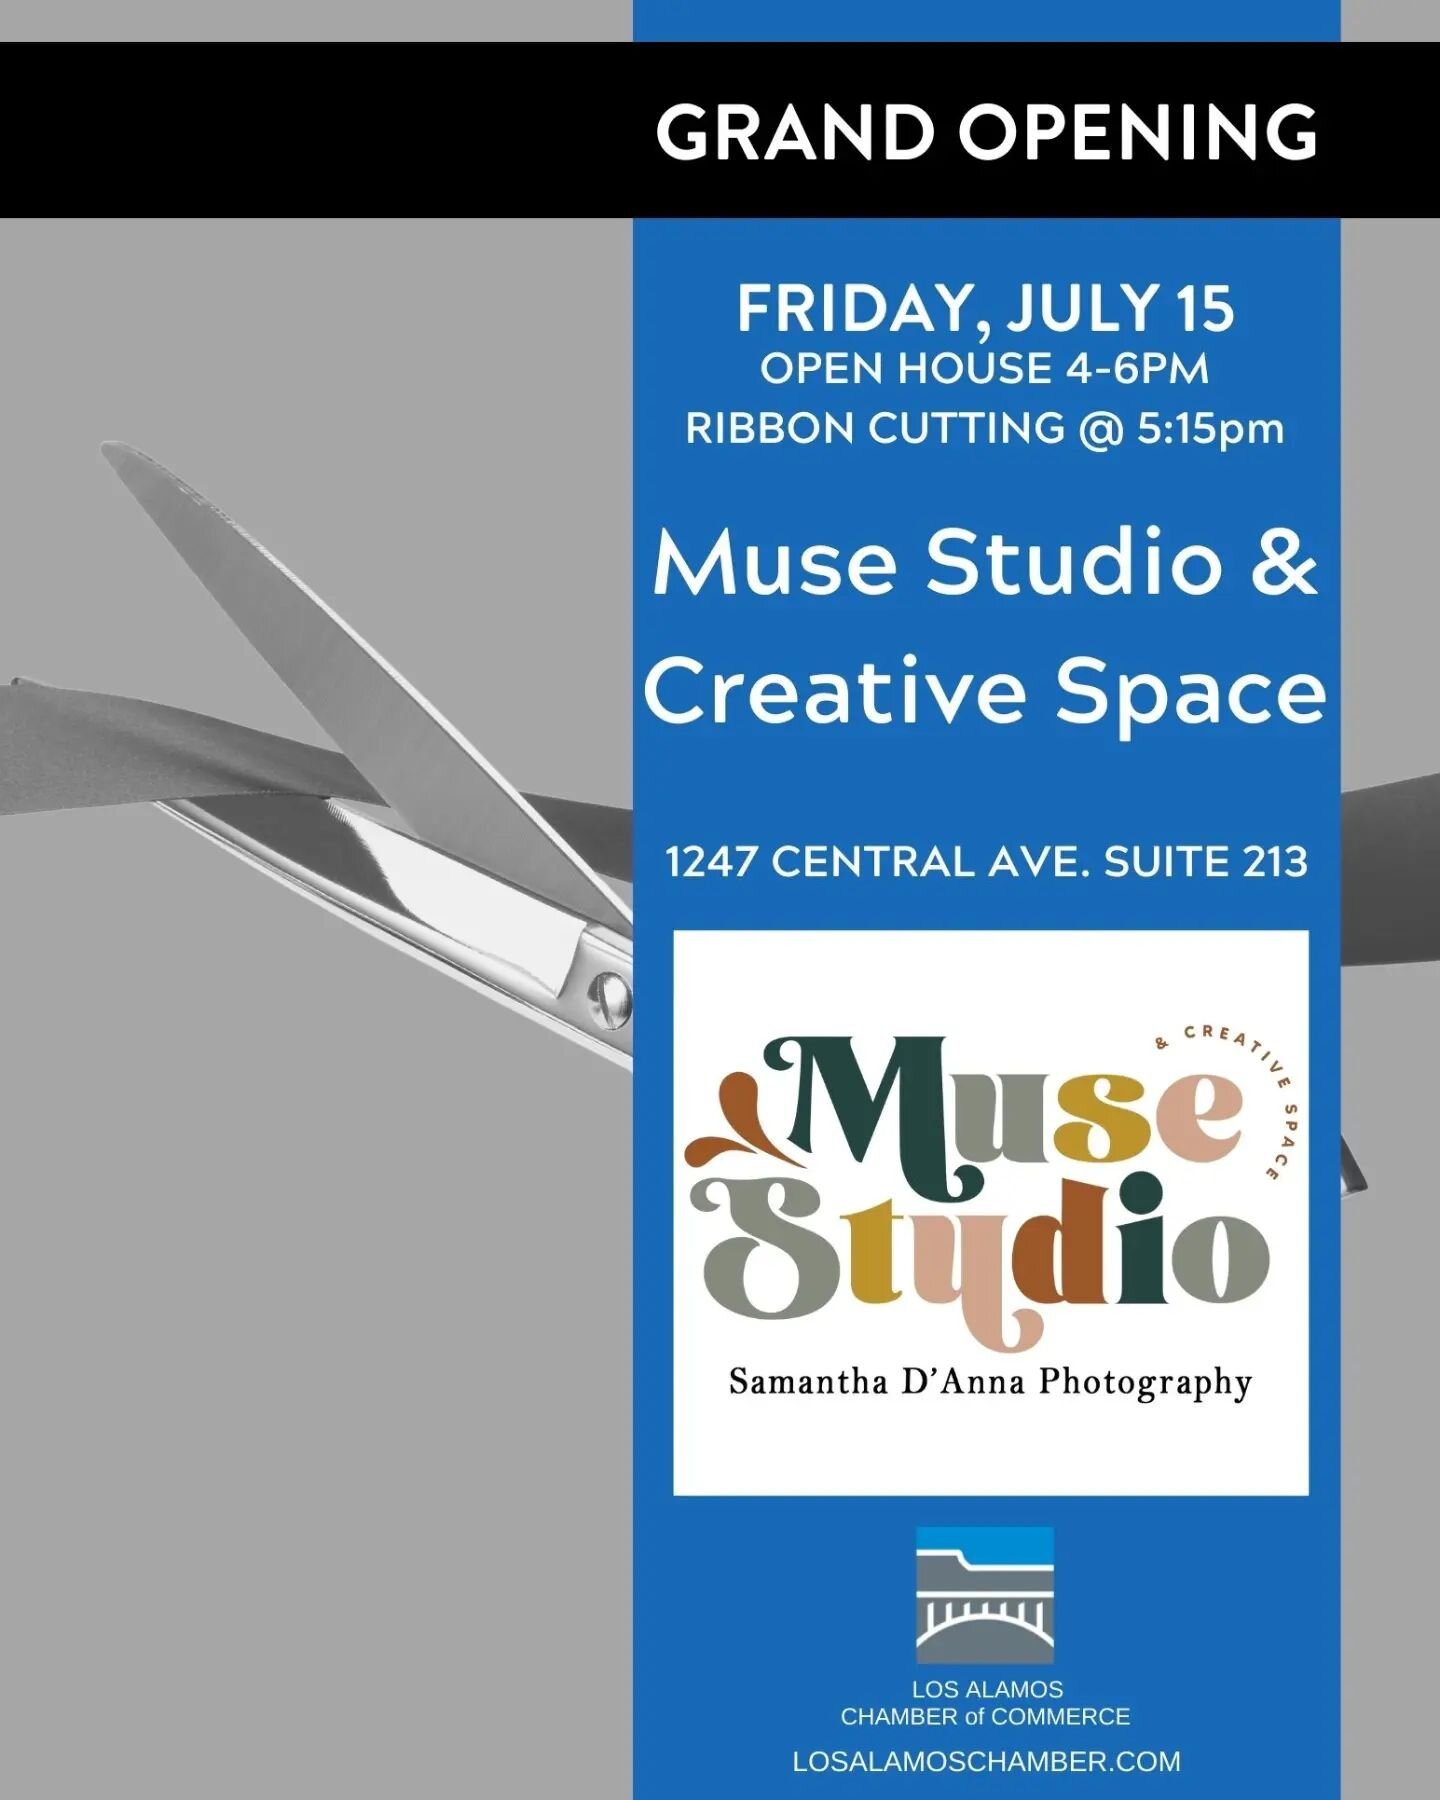 If yall are free next Friday it would be a great time to swing by and check out the space. If you come to the opening I will give you 20% off your first booking! #losalamosphotographer #losalamosphotostudio #musestudioandcreativespace #grandopening